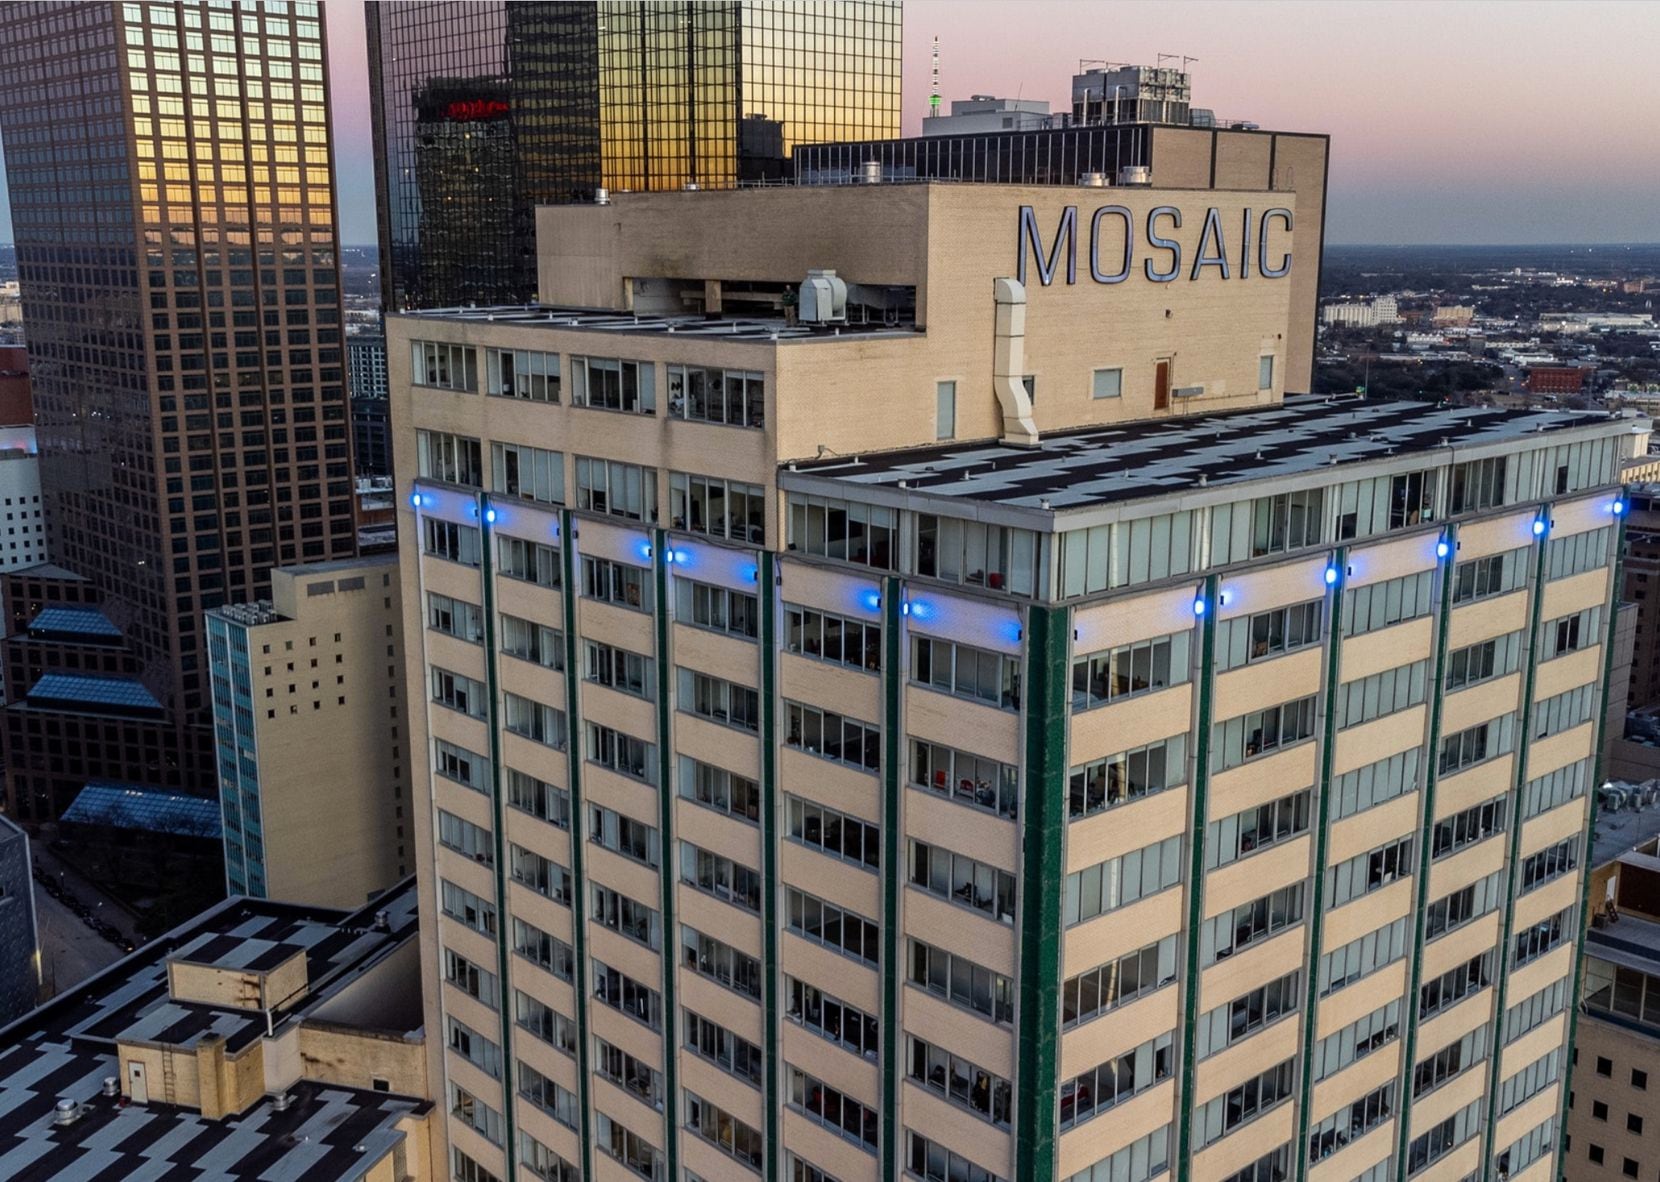 The Mosaic includes two buildings that previously housed offices for a life insurance company.